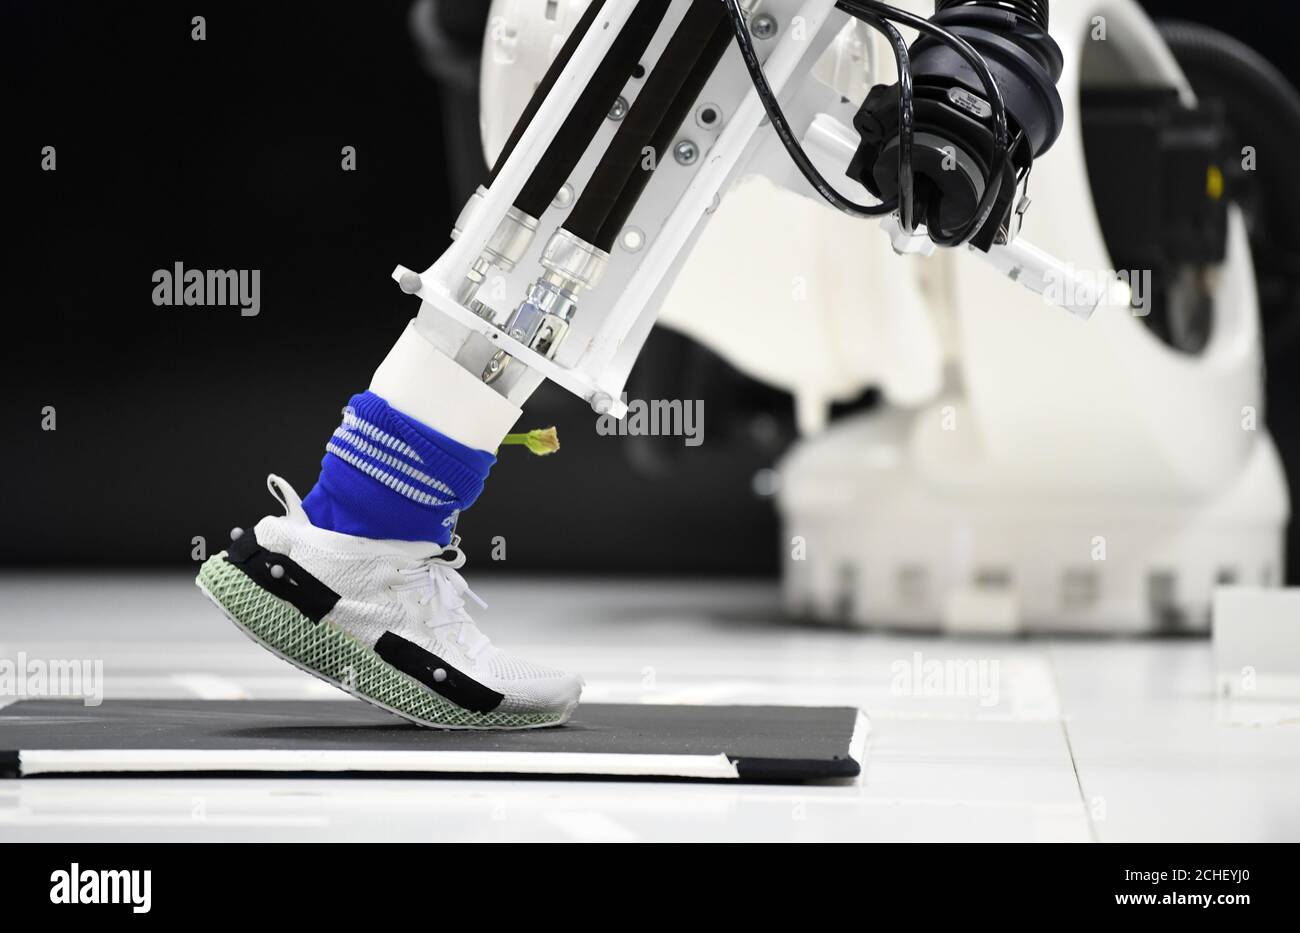 The Adidas shoe Alphaedge with a Elastomer mid-sole from a 3D printer is  tested by a robot during celebrations for German sports apparel maker Adidas'  70th anniversary at the company's FutureLab in